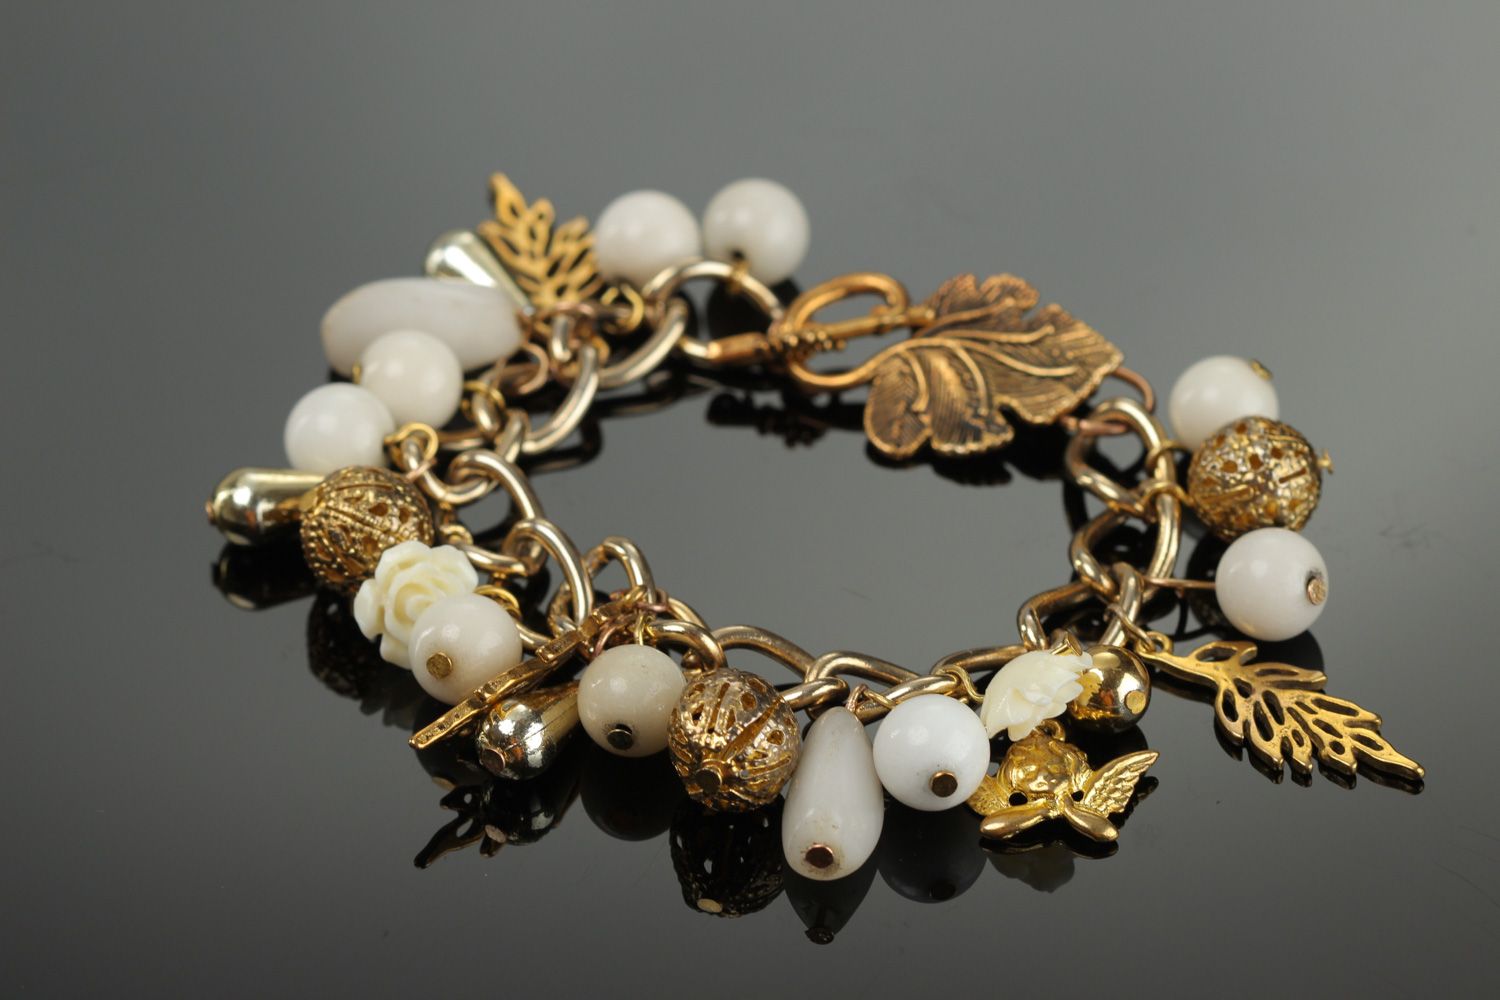 Handmade women's wrist bracelet with charms and beads of white and gold color photo 1